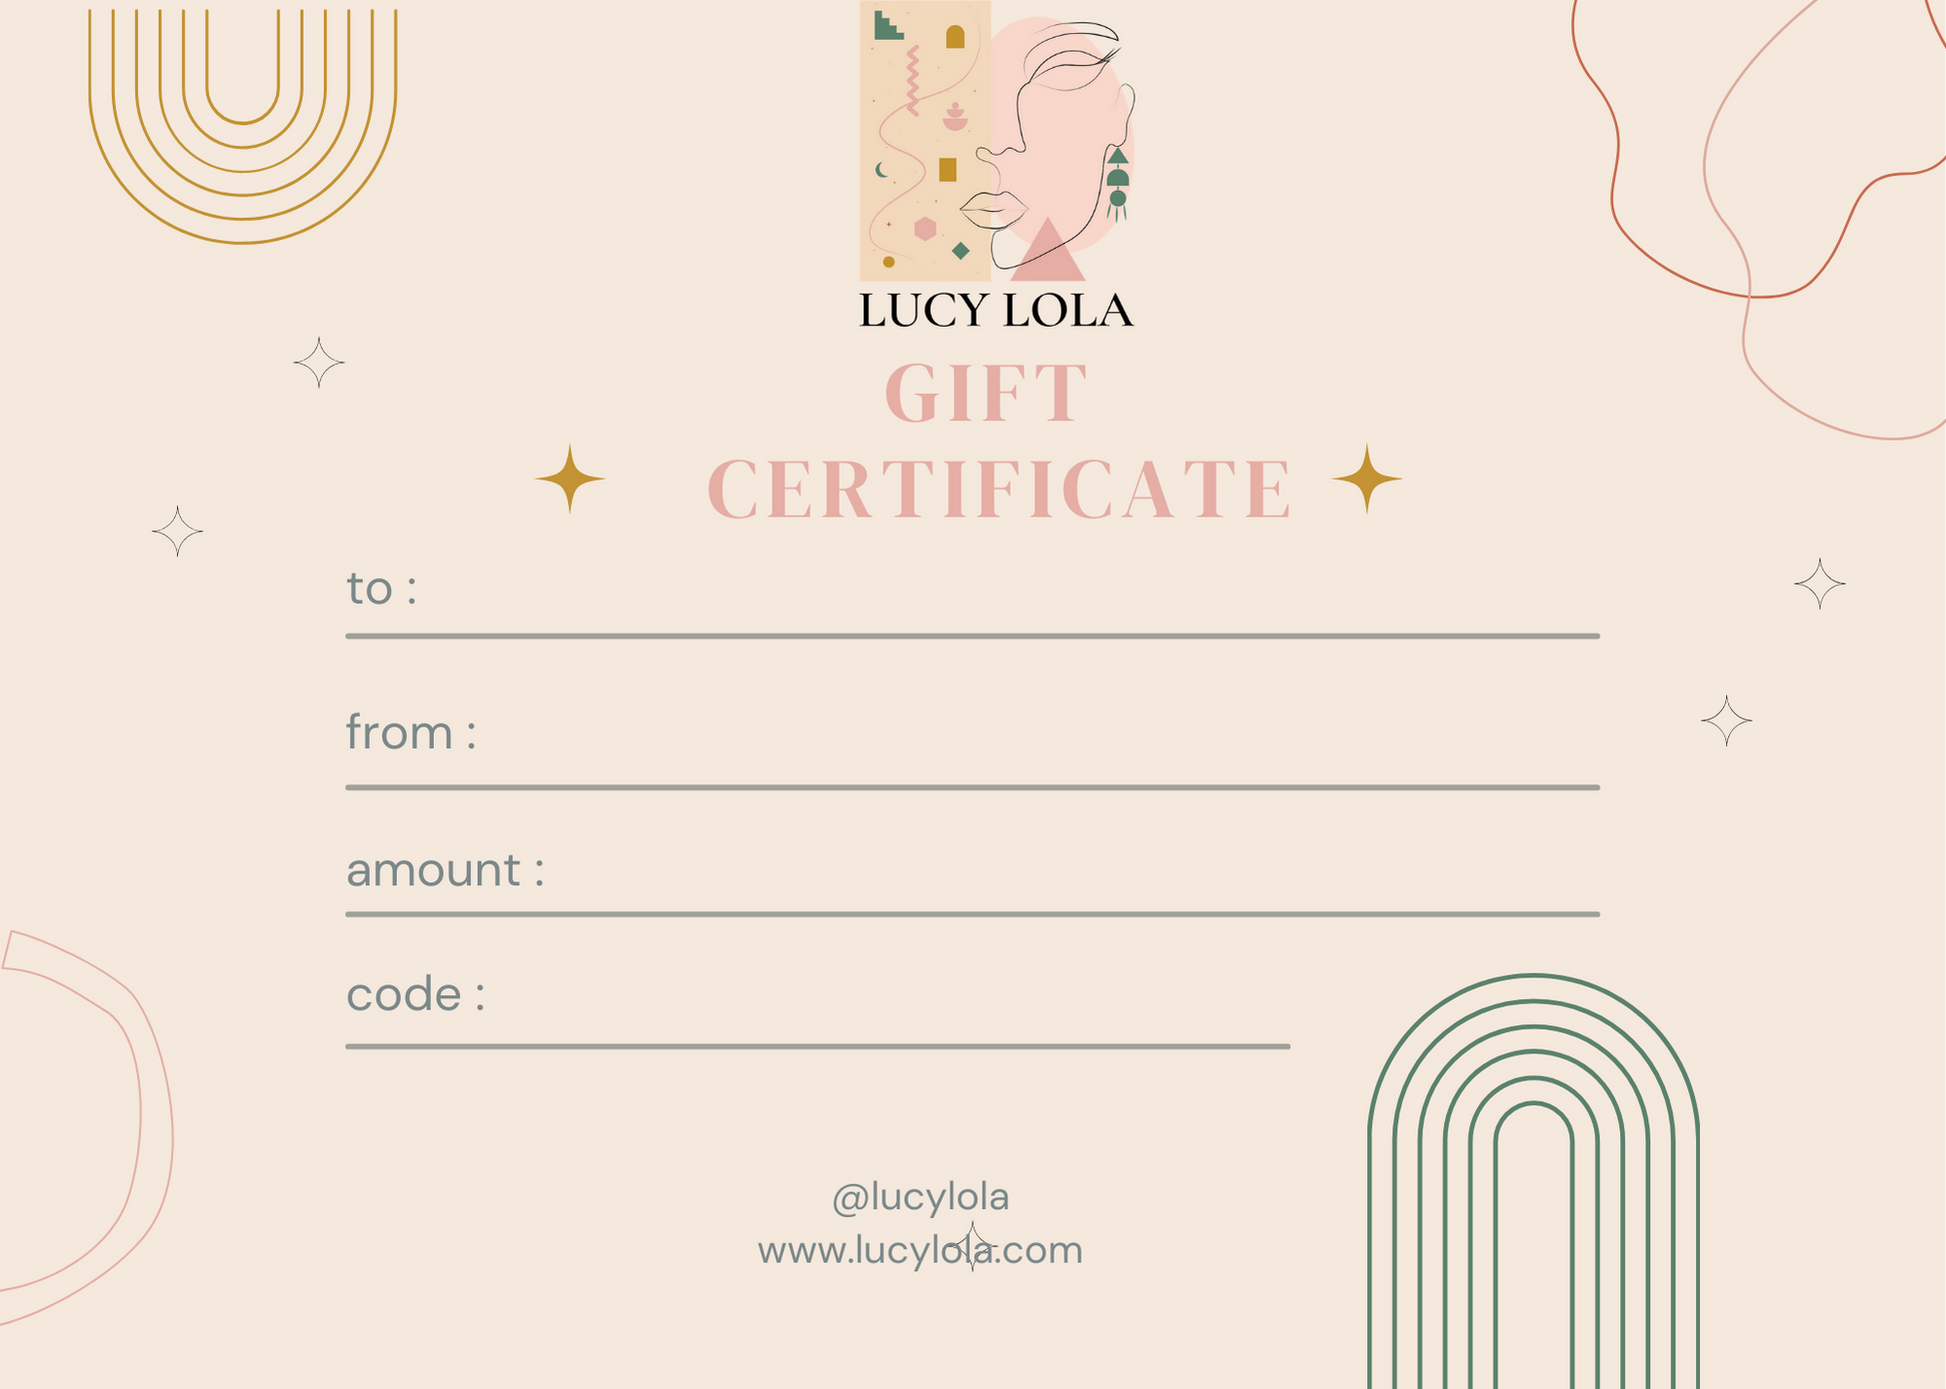 Gift Certificate - LucyLola 